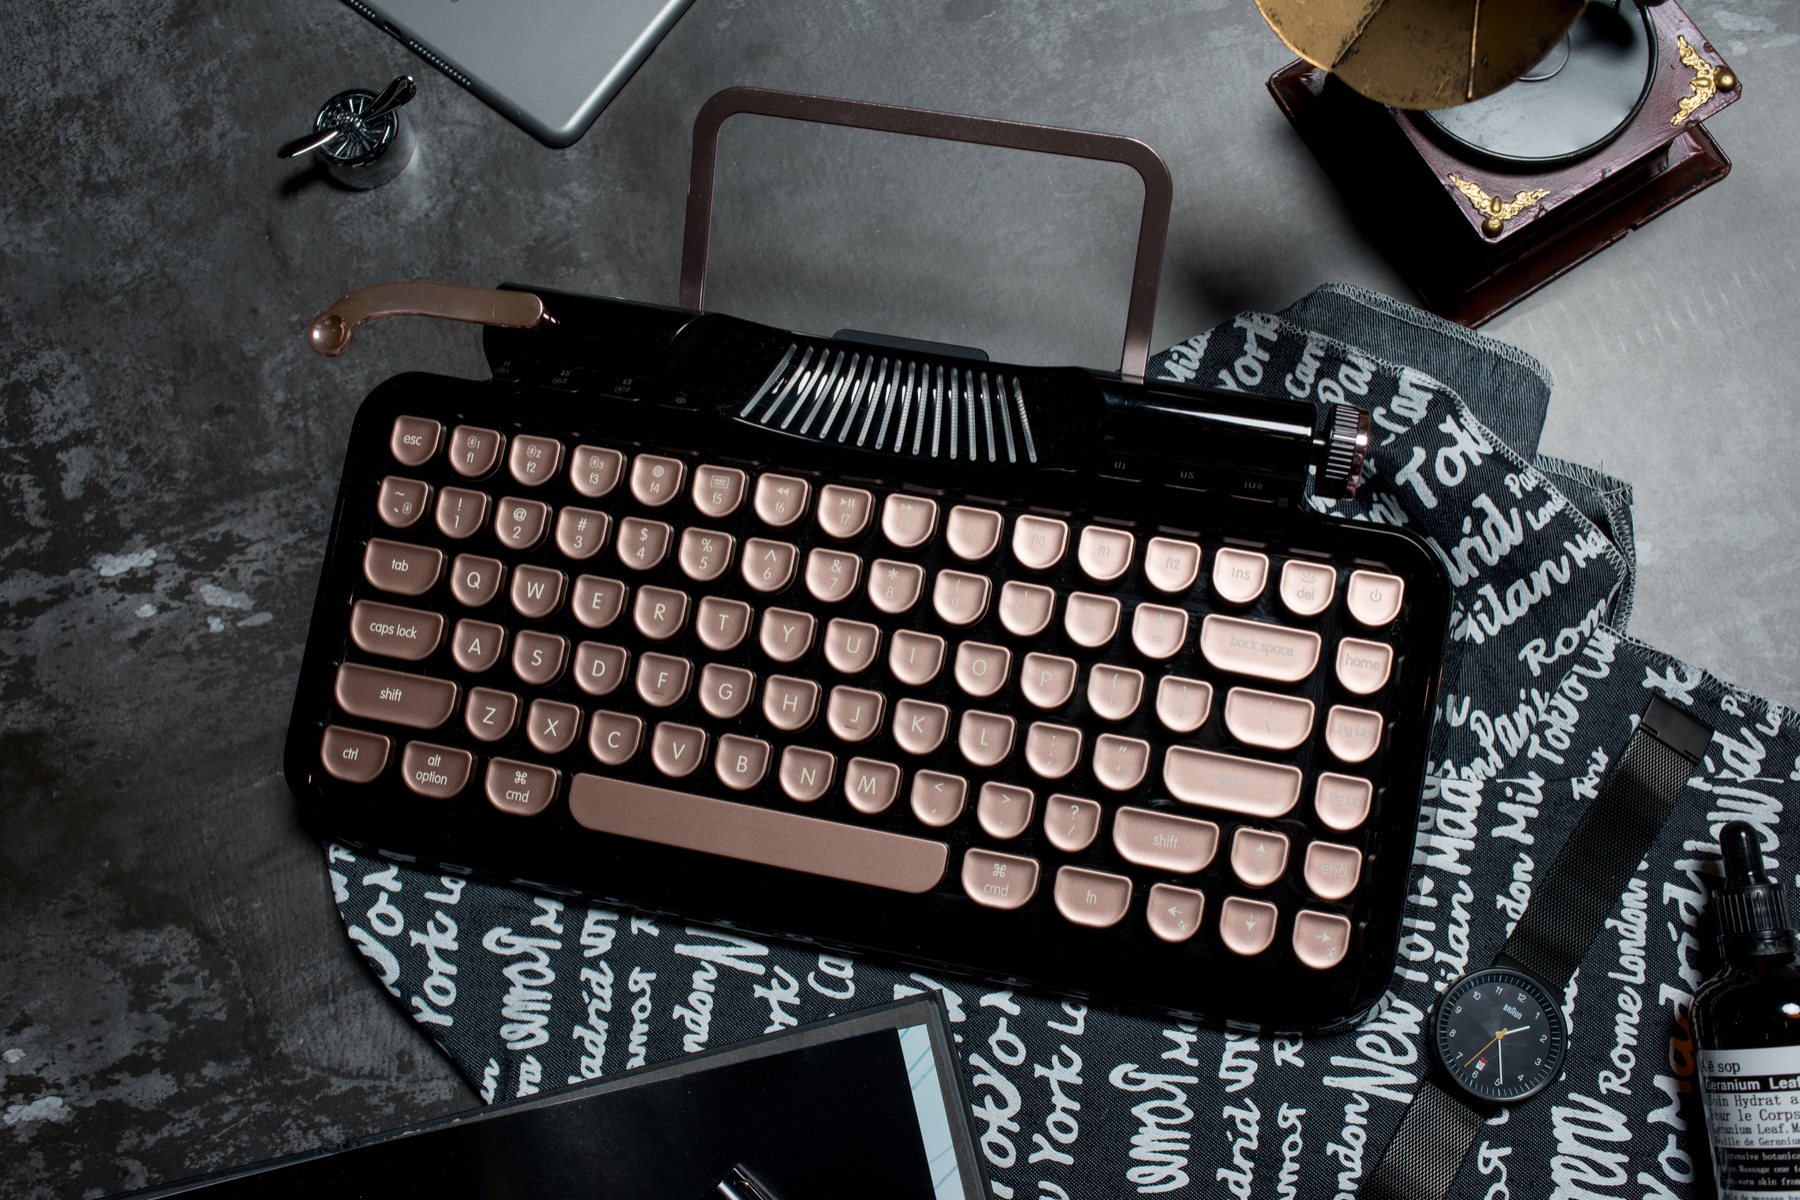 What is mechanical keyboard and why people like it?